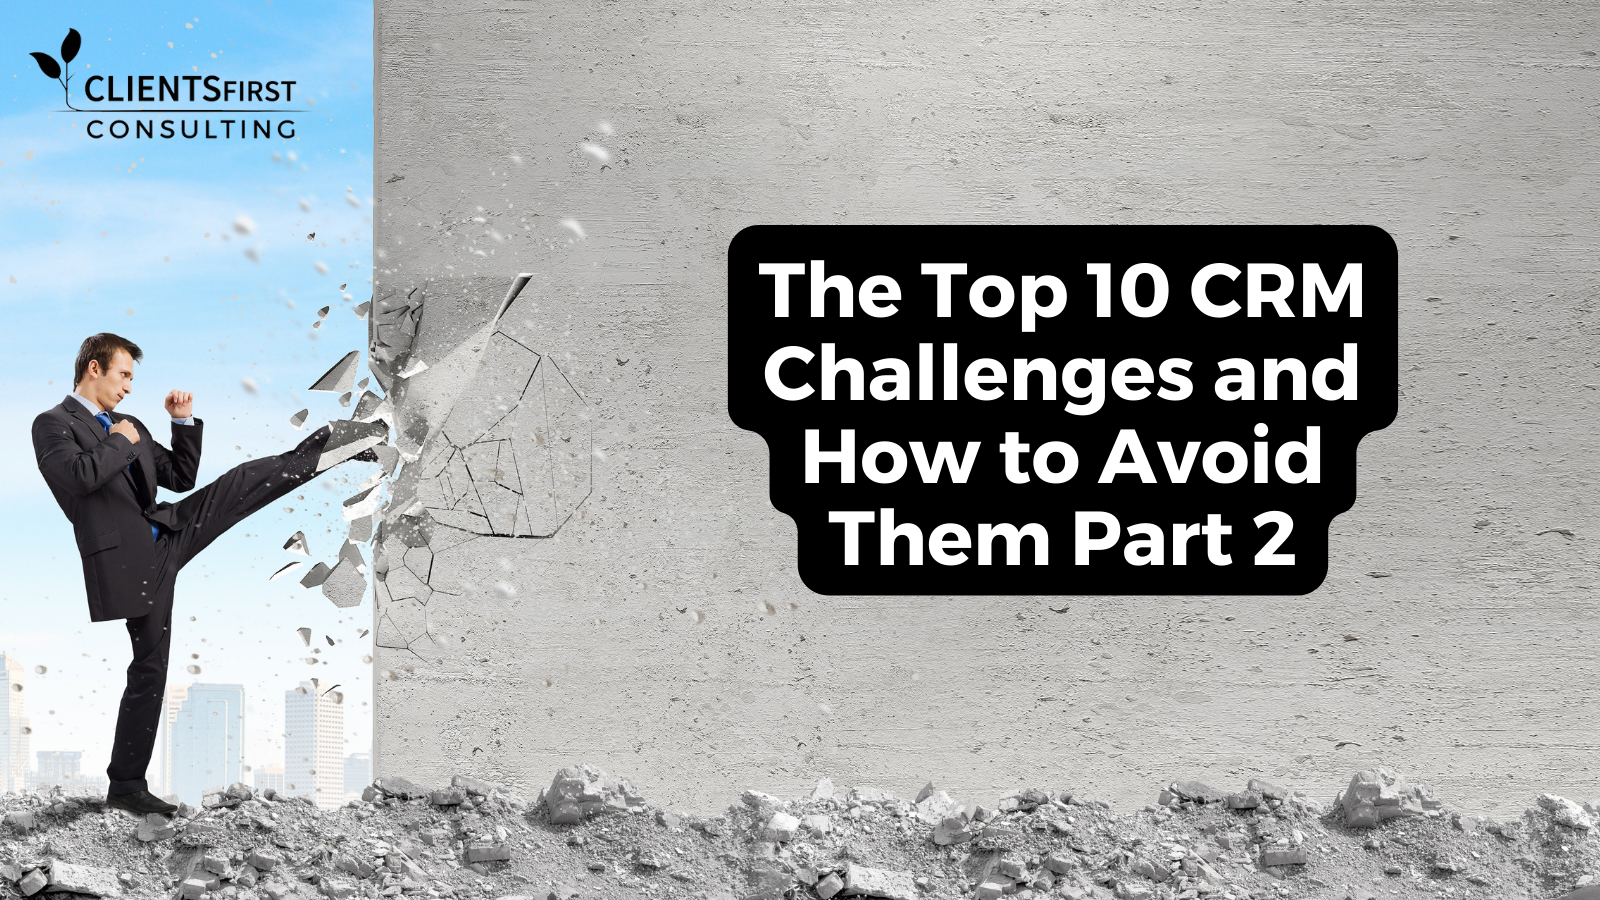 The Top 10 CRM Challenges & How To Avoid Them Part 2